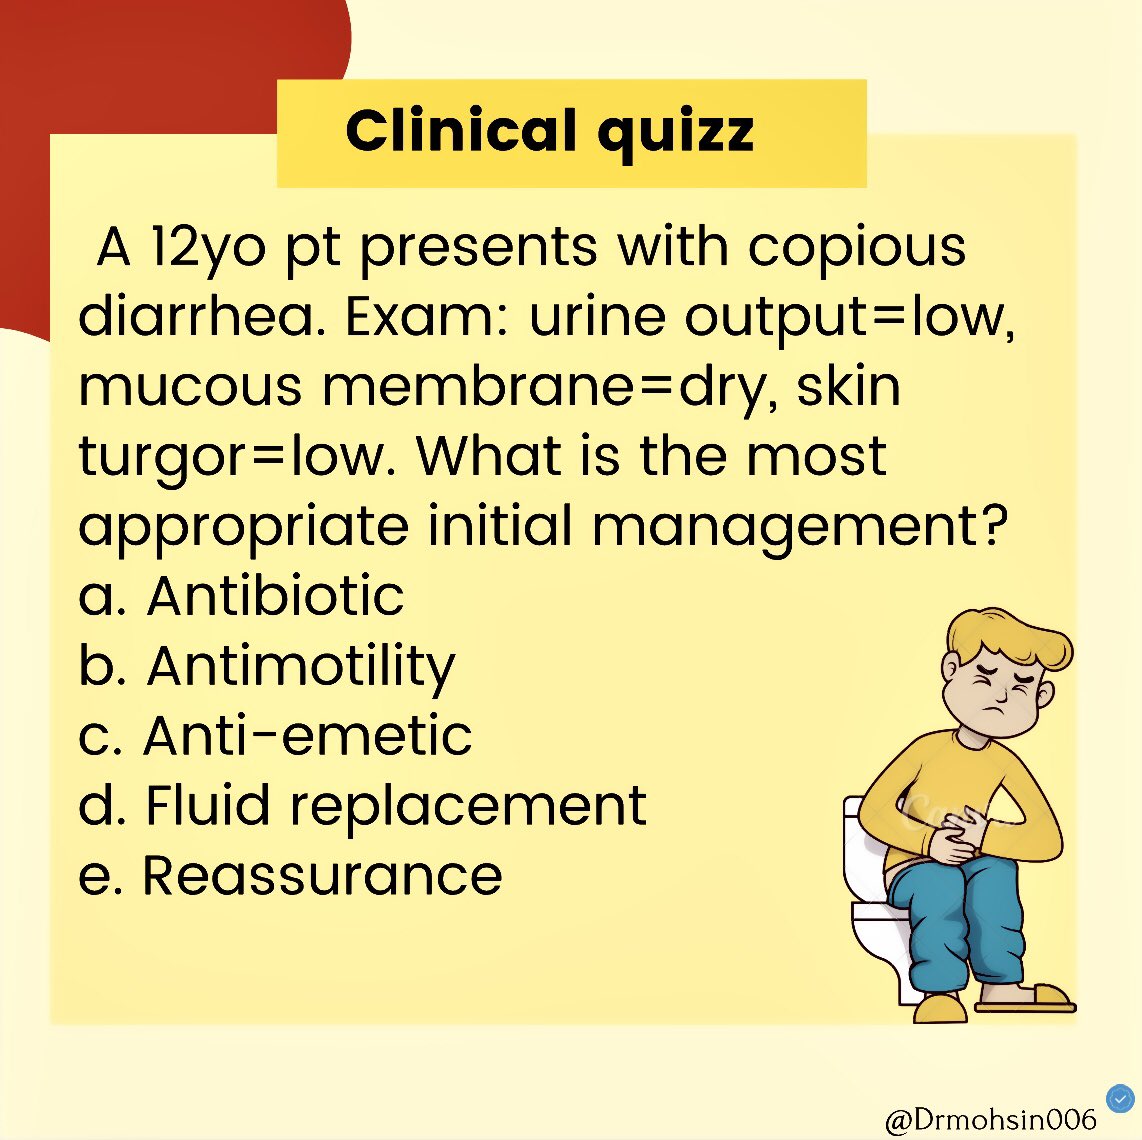 Is your brain hydrated enough for this quiz? 💦 Prove it! Comment your answers and stay sharp!
#MedEd #MedX